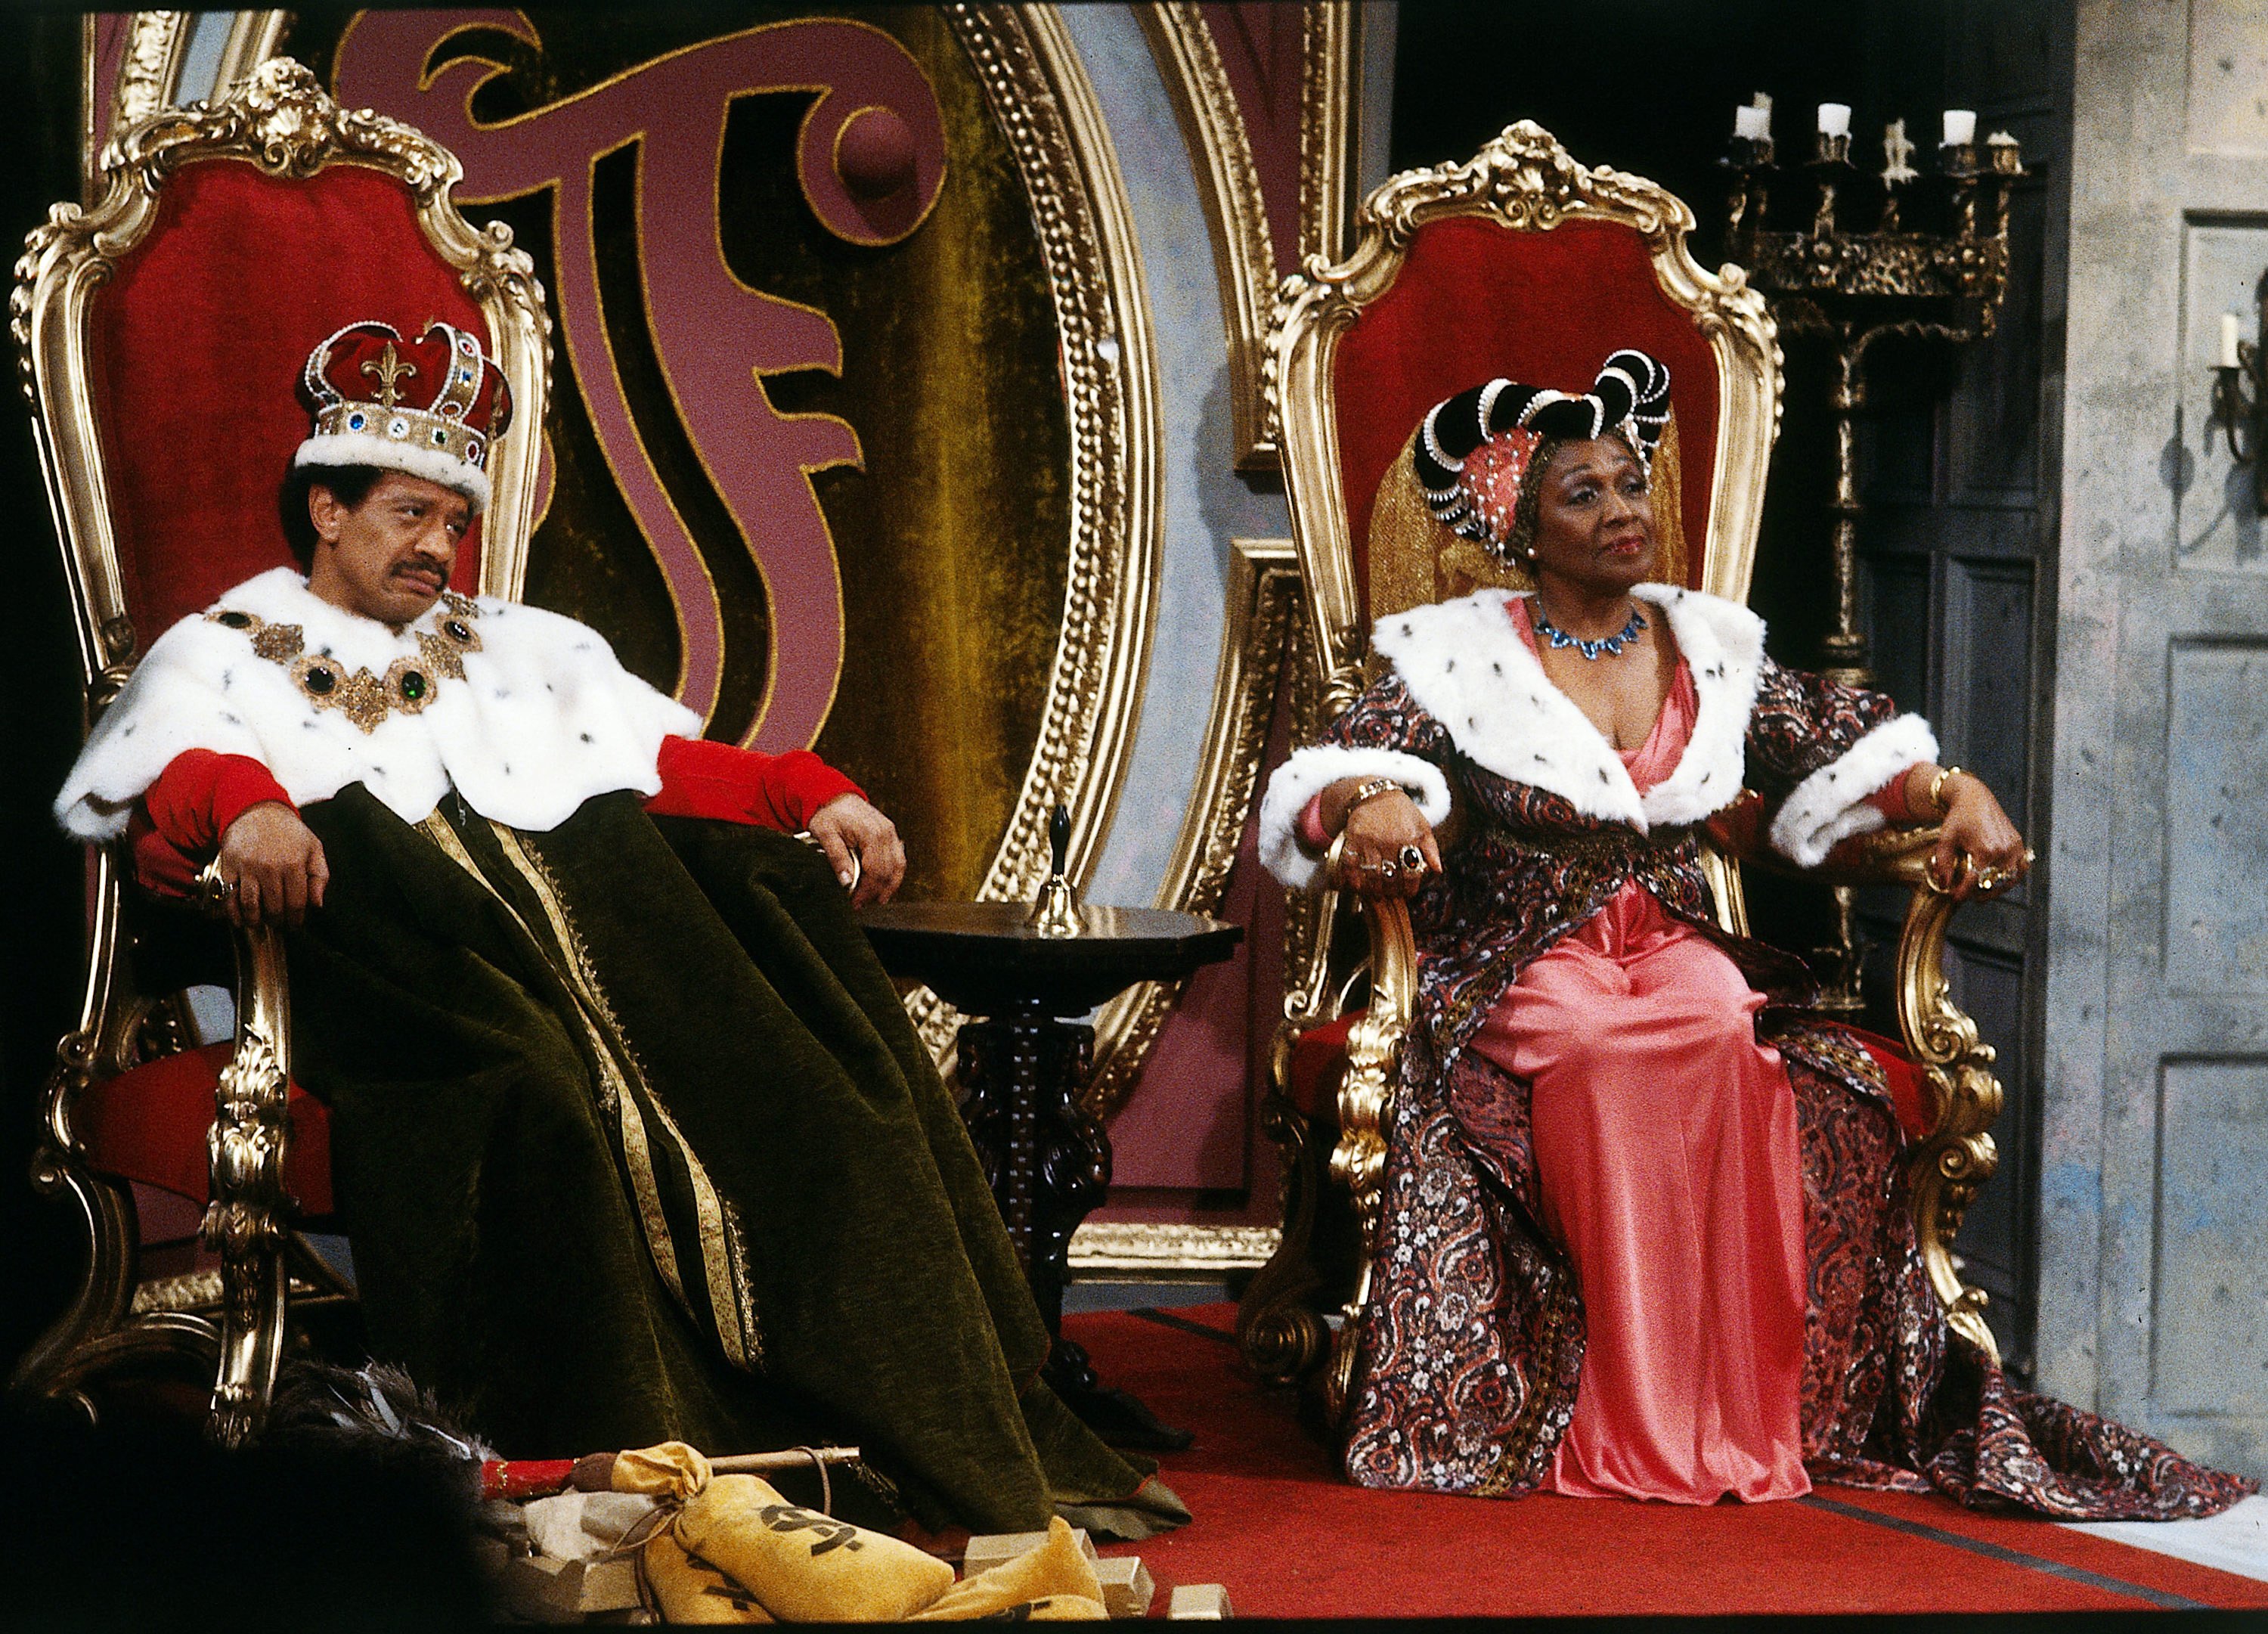 Actors Sherman Hemsley and Isabel Sanford play George and Louise Jefferson dressed up as a king and queen in a scene from the sitcom 'The Jeffersons,' 1975.